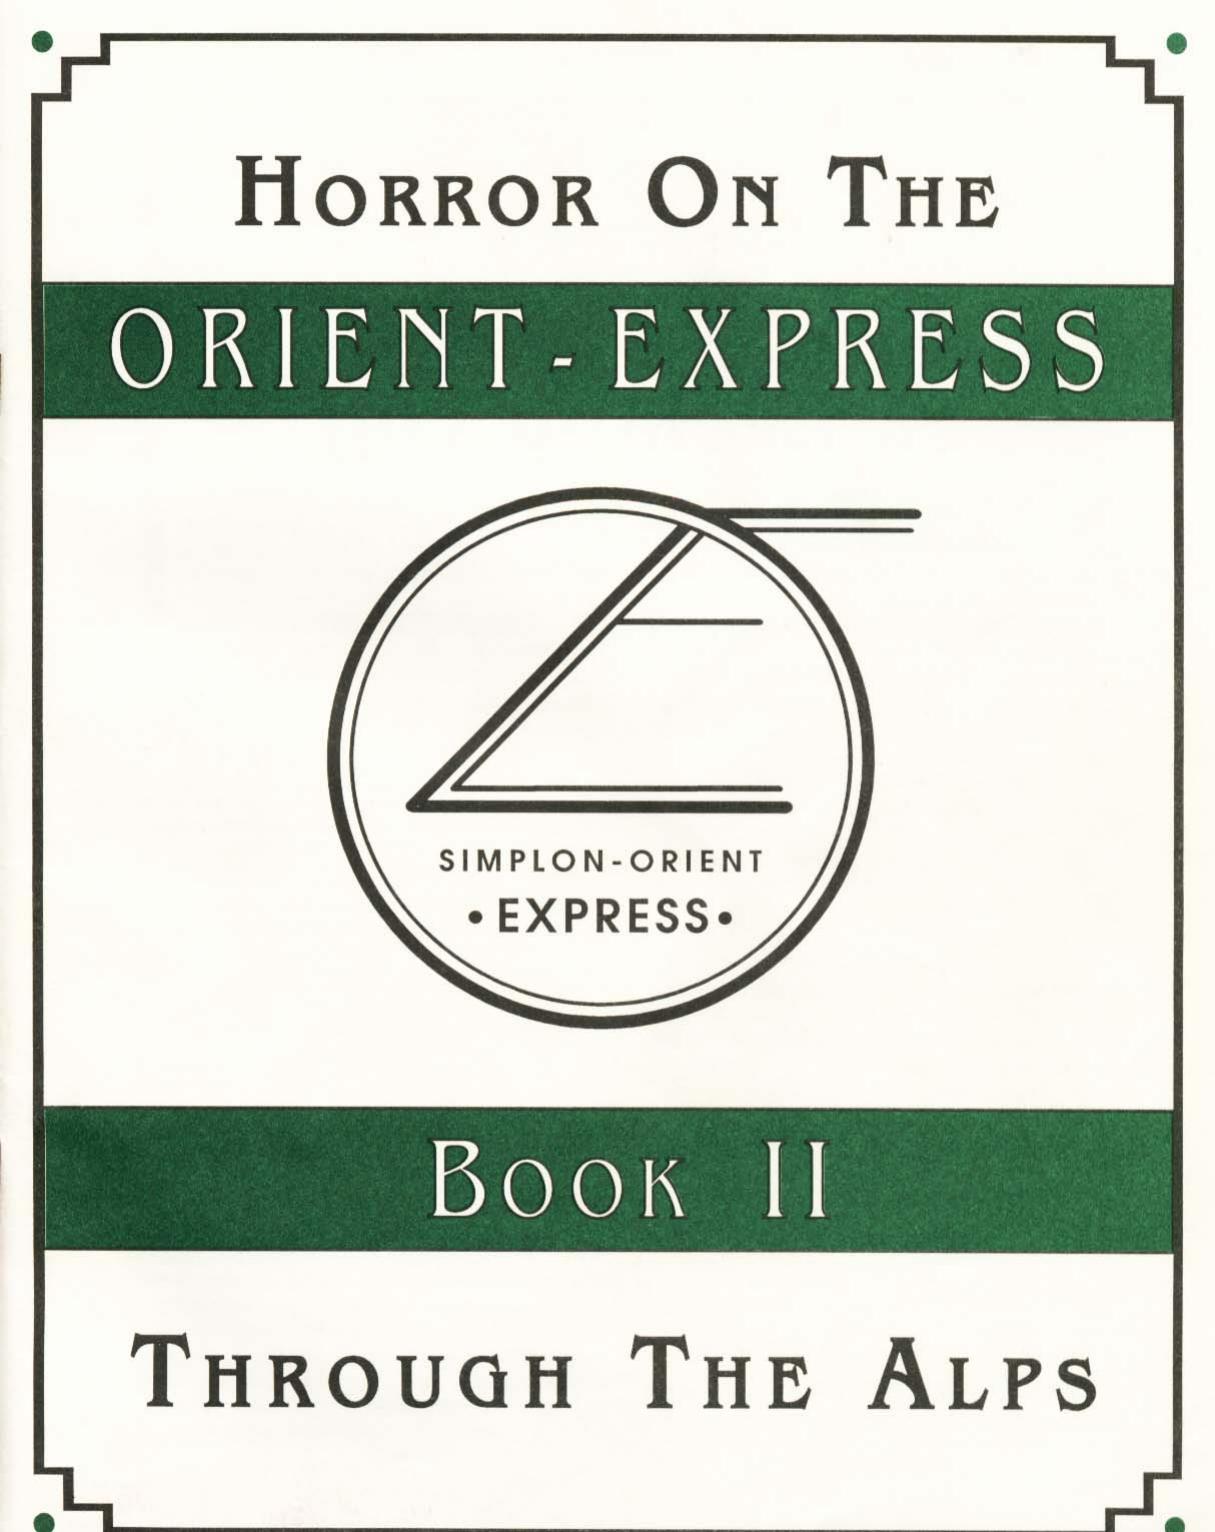 CoC Horror on the Orient Express Book 2